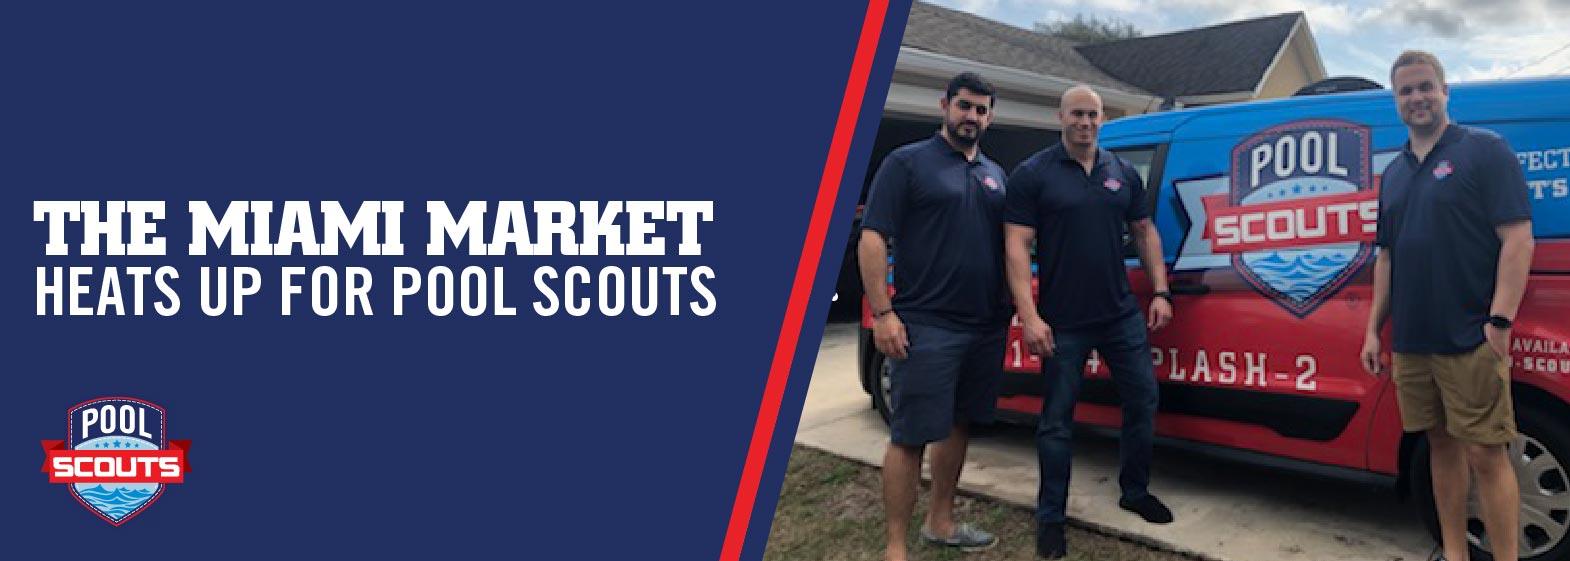 Image of The Miami Market Heats Up for Pool Scouts